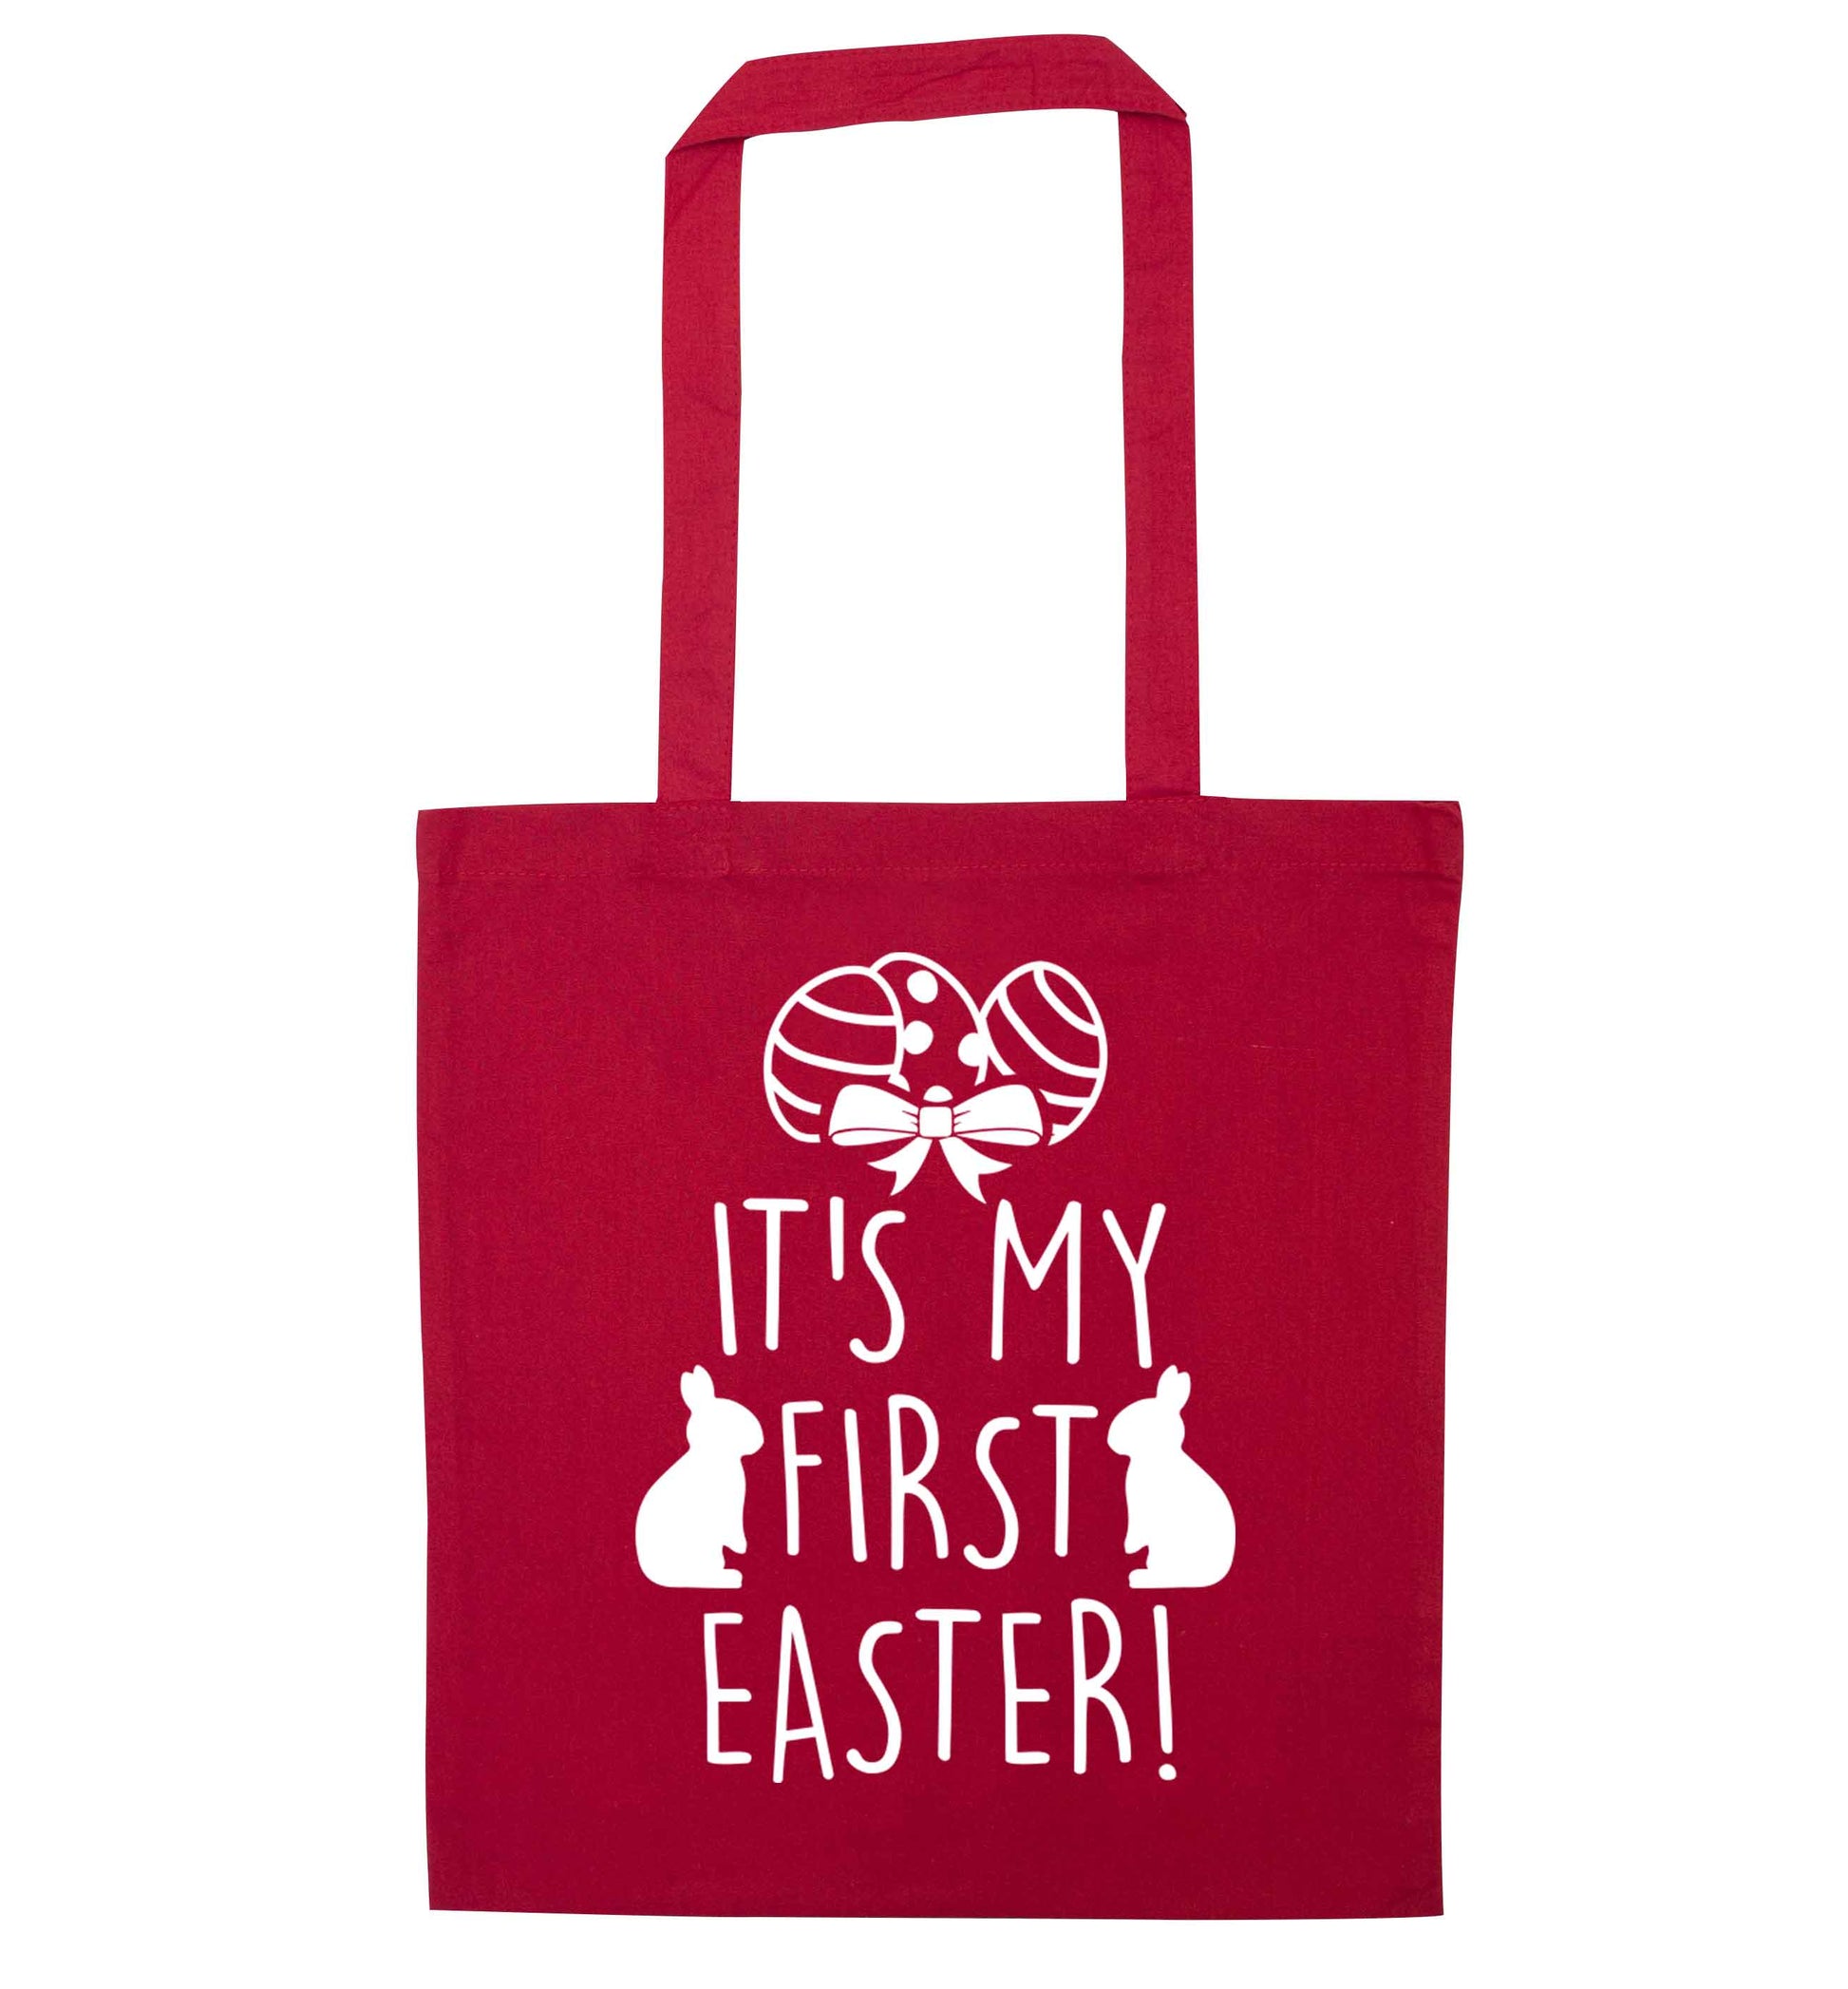 It's my first Easter red tote bag